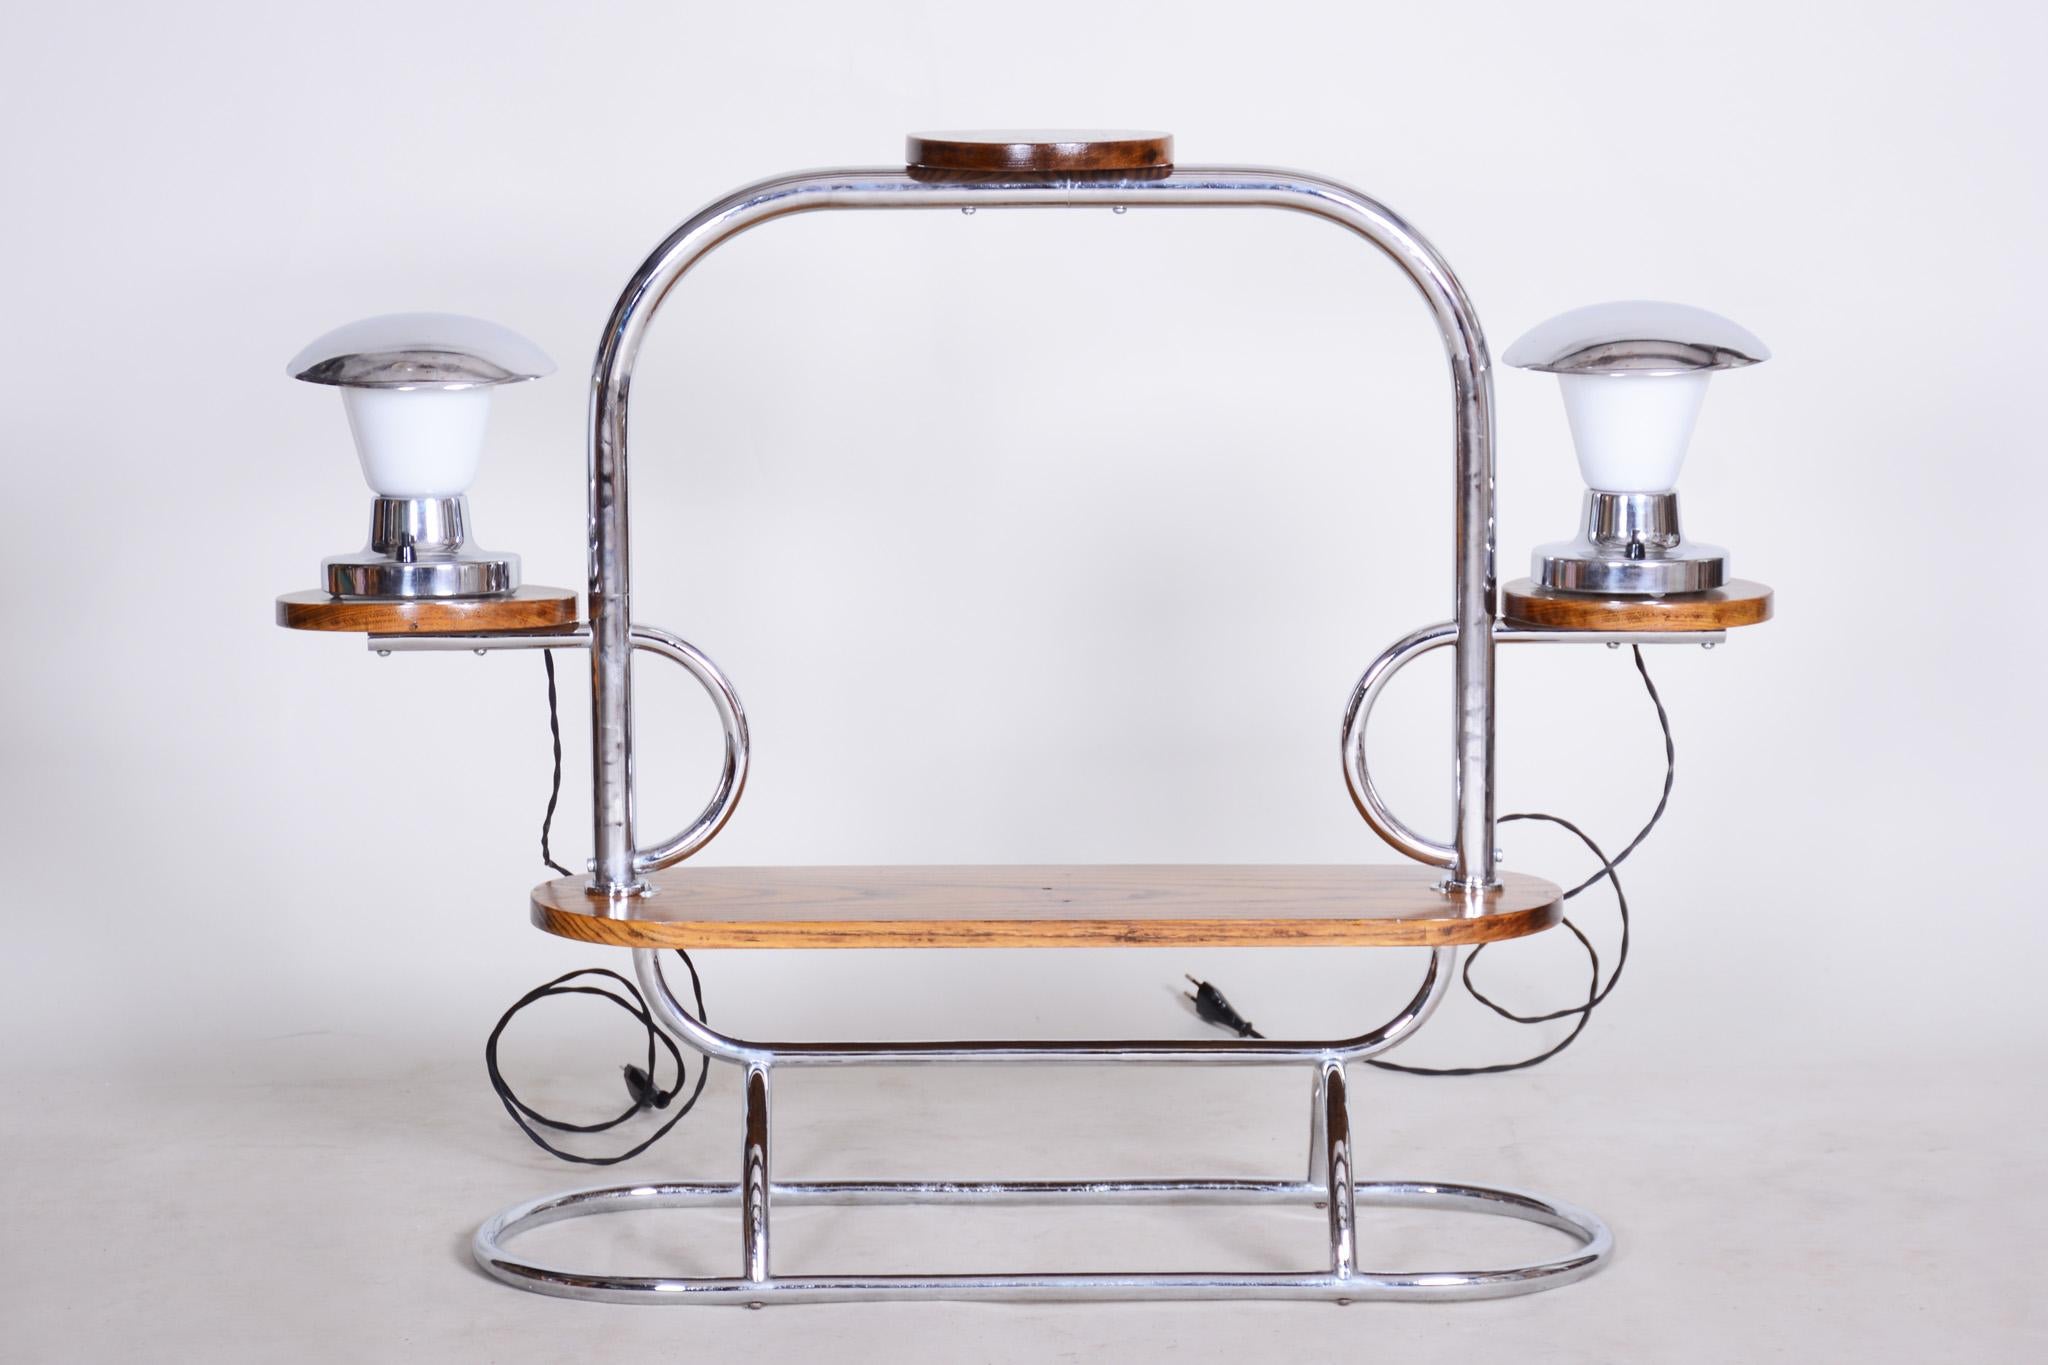 Czech Bauhaus Chrome Flower Stand Made Out of Oak, Lacquered, 1930s In Good Condition For Sale In Horomerice, CZ